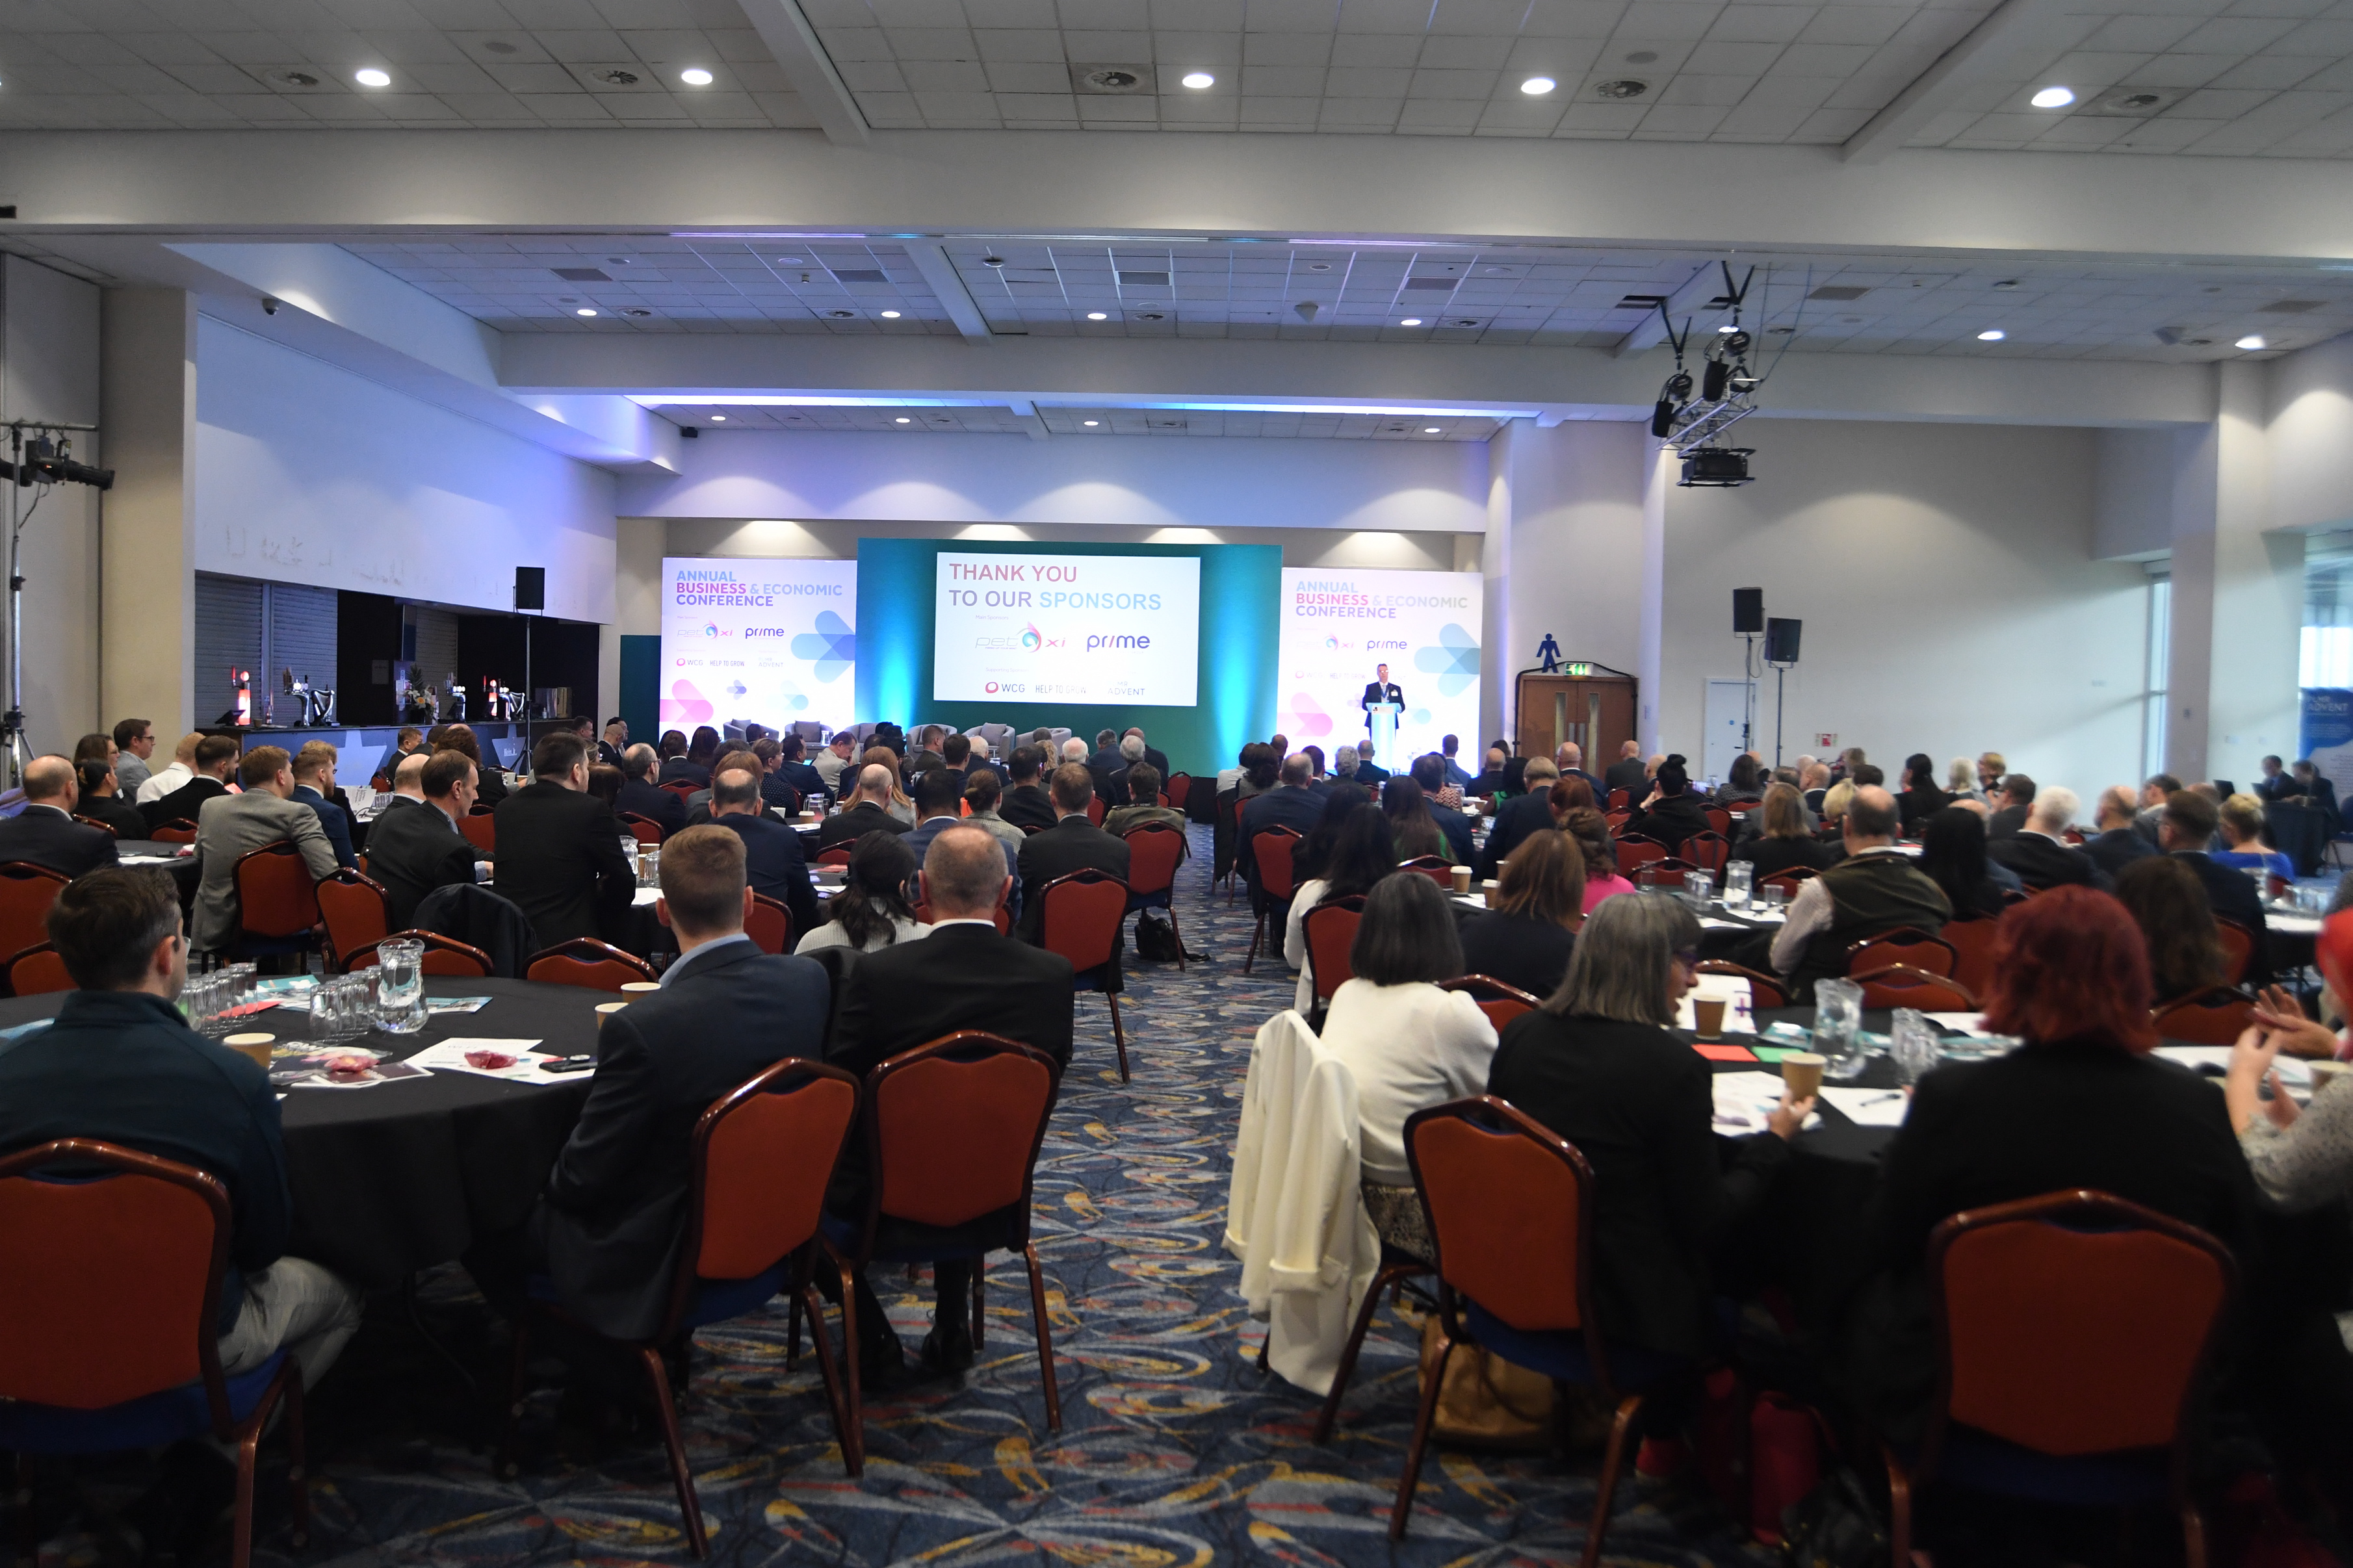 Key issues affecting businesses will be discussed at major conference in the region